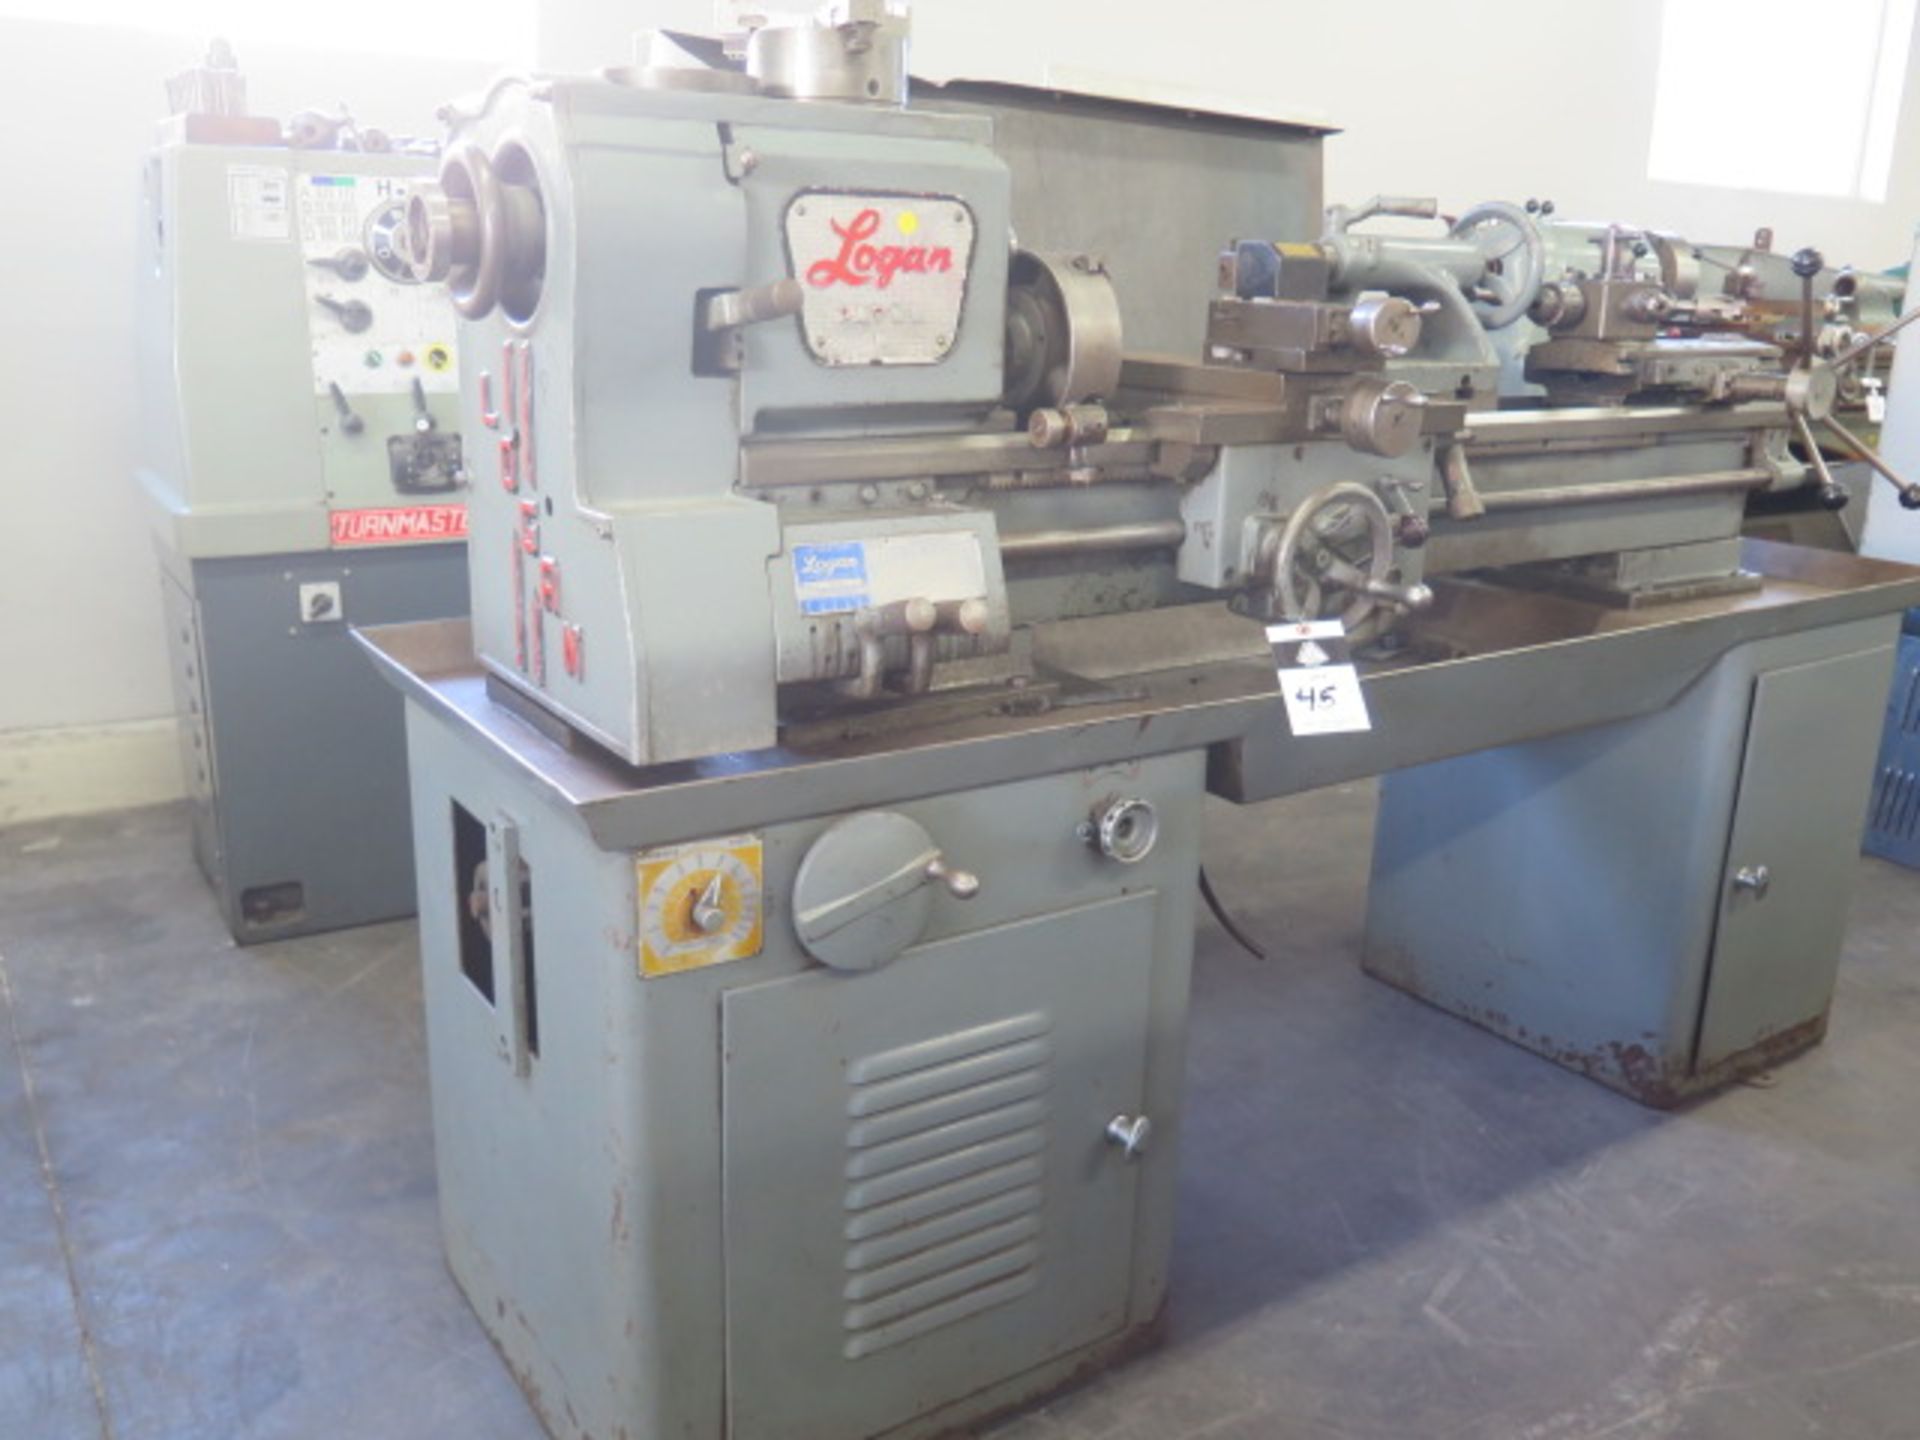 Logan mdl. 6560 12” x 42” Lathe s/n 61470 w/ Inch Threading, Tailstock, 6-Station Turret SOLD AS IS